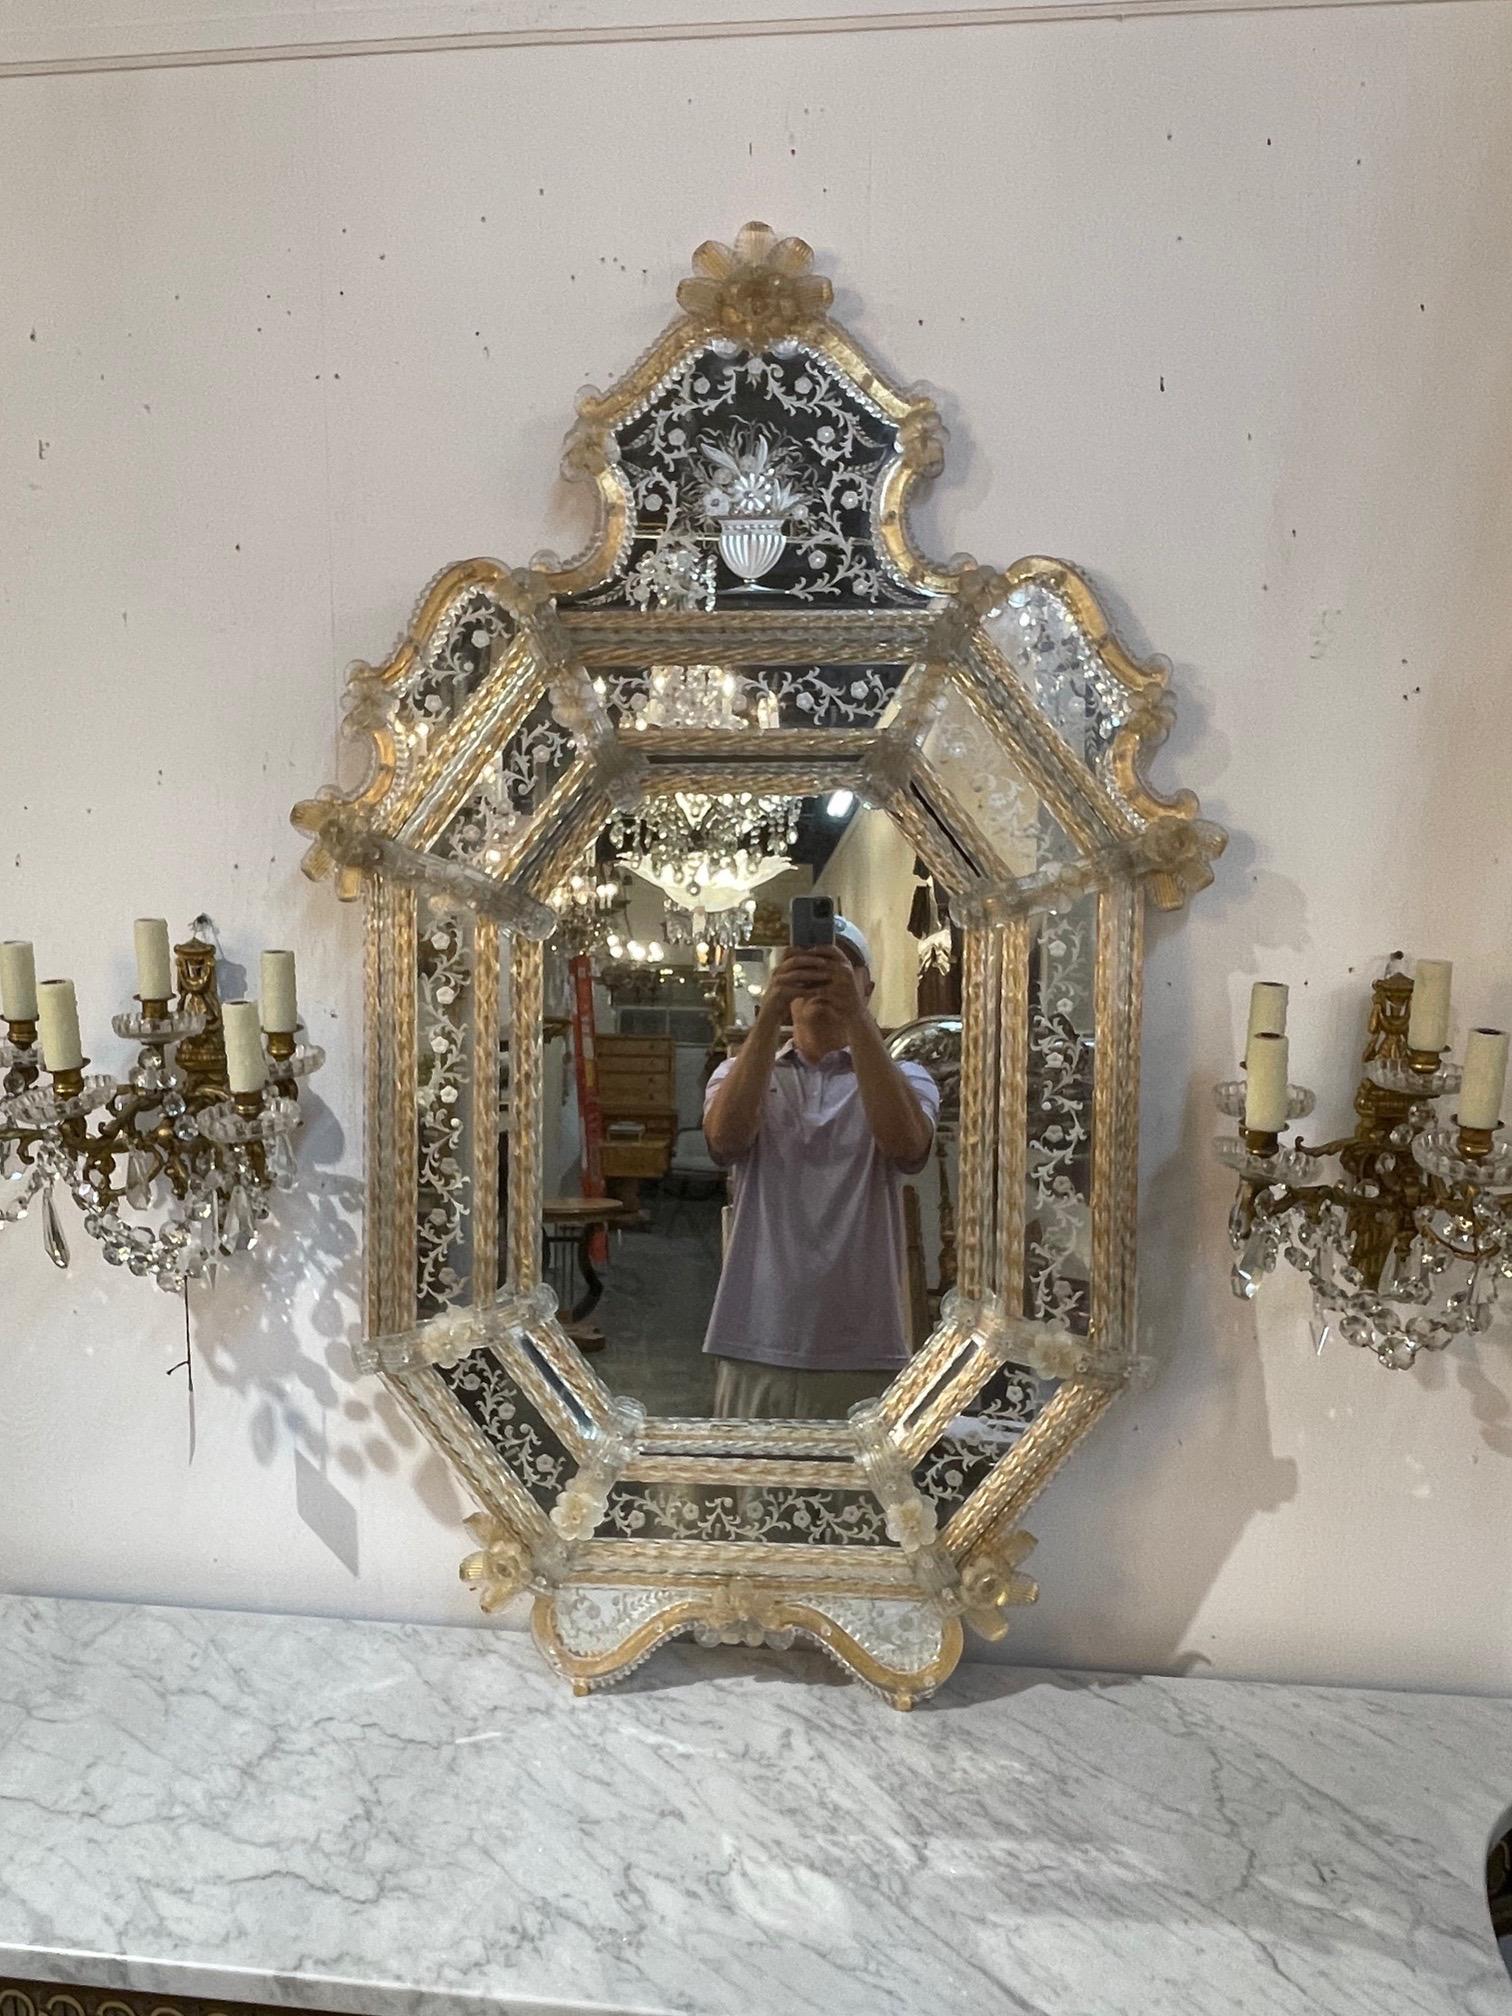 Beautiful early 20th century antique Venetian etched glass mirror. Lovely images including leaves, flowers and a vase on the mirror along with pretty gold and white decorative venetian glass on the border. A classic piece!! And in great condition!